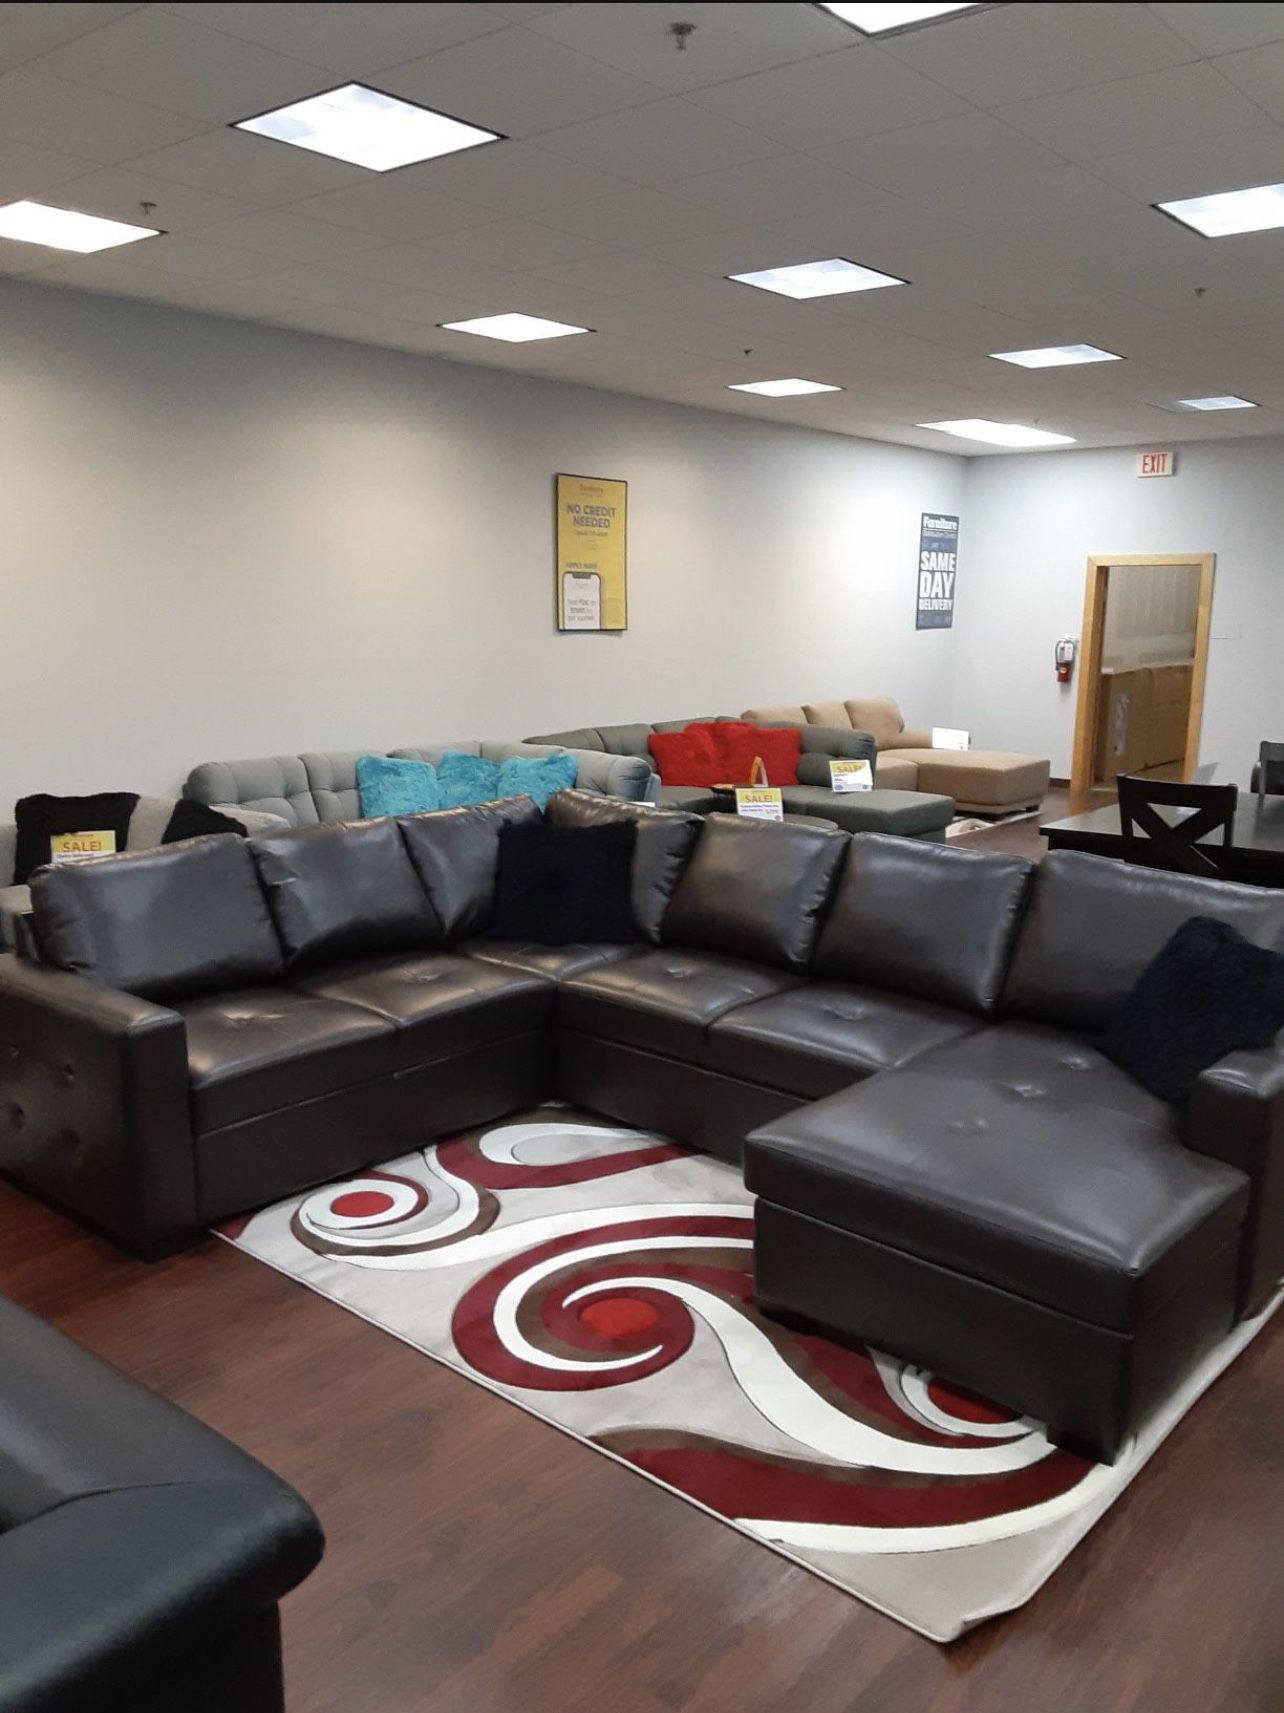 COMFY NEW MONTEREY BROWN SECTIONAL SOFA WITH STORAGE CHAISE ON SALE ONLY $1299. EASY FINANCING 